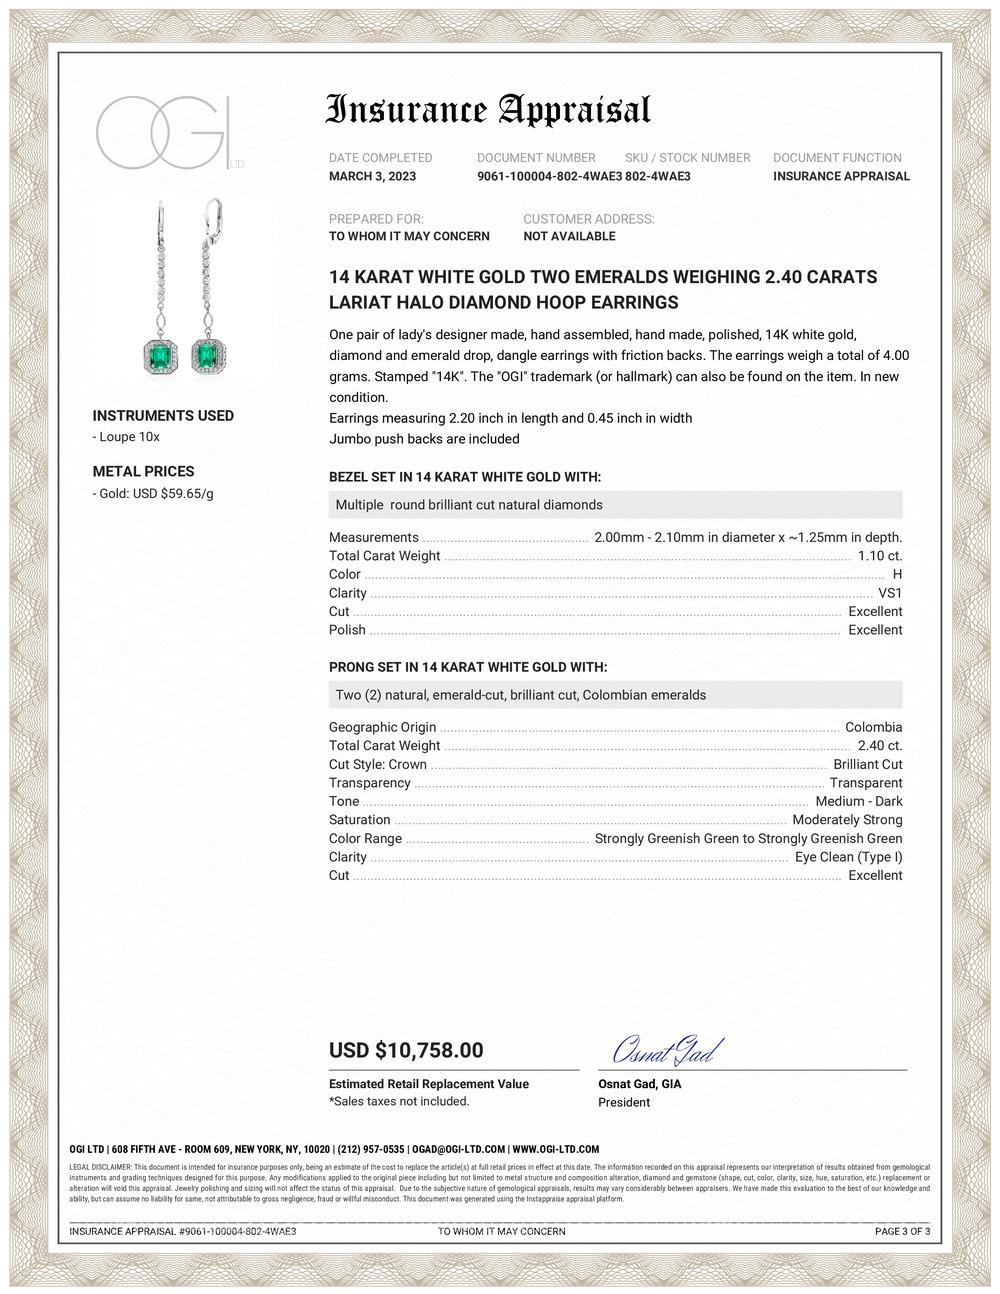 
Introducing our exquisite handmade earrings crafted in New York City: the Emerald Shaped Emeralds Halo Diamond Lariat Earrings. These stunning earrings are made of fourteen karats white gold, featuring emerald-shaped emeralds with a total weight of